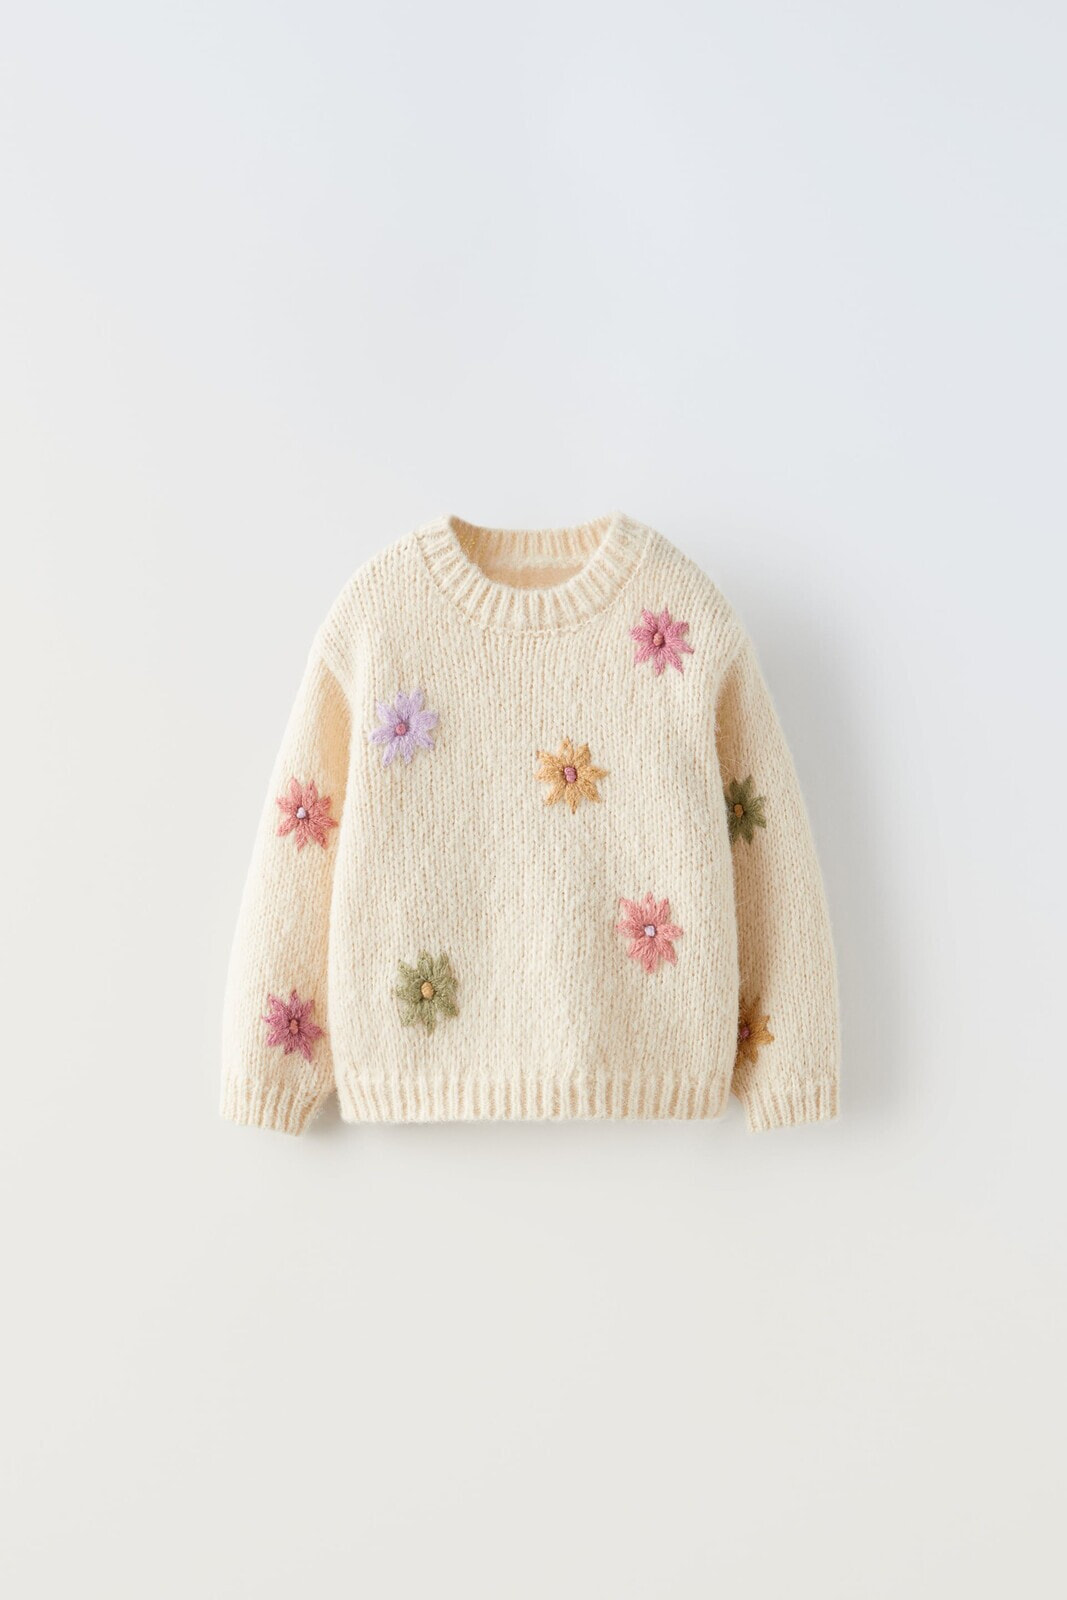 Knit sweater with floral embroidery